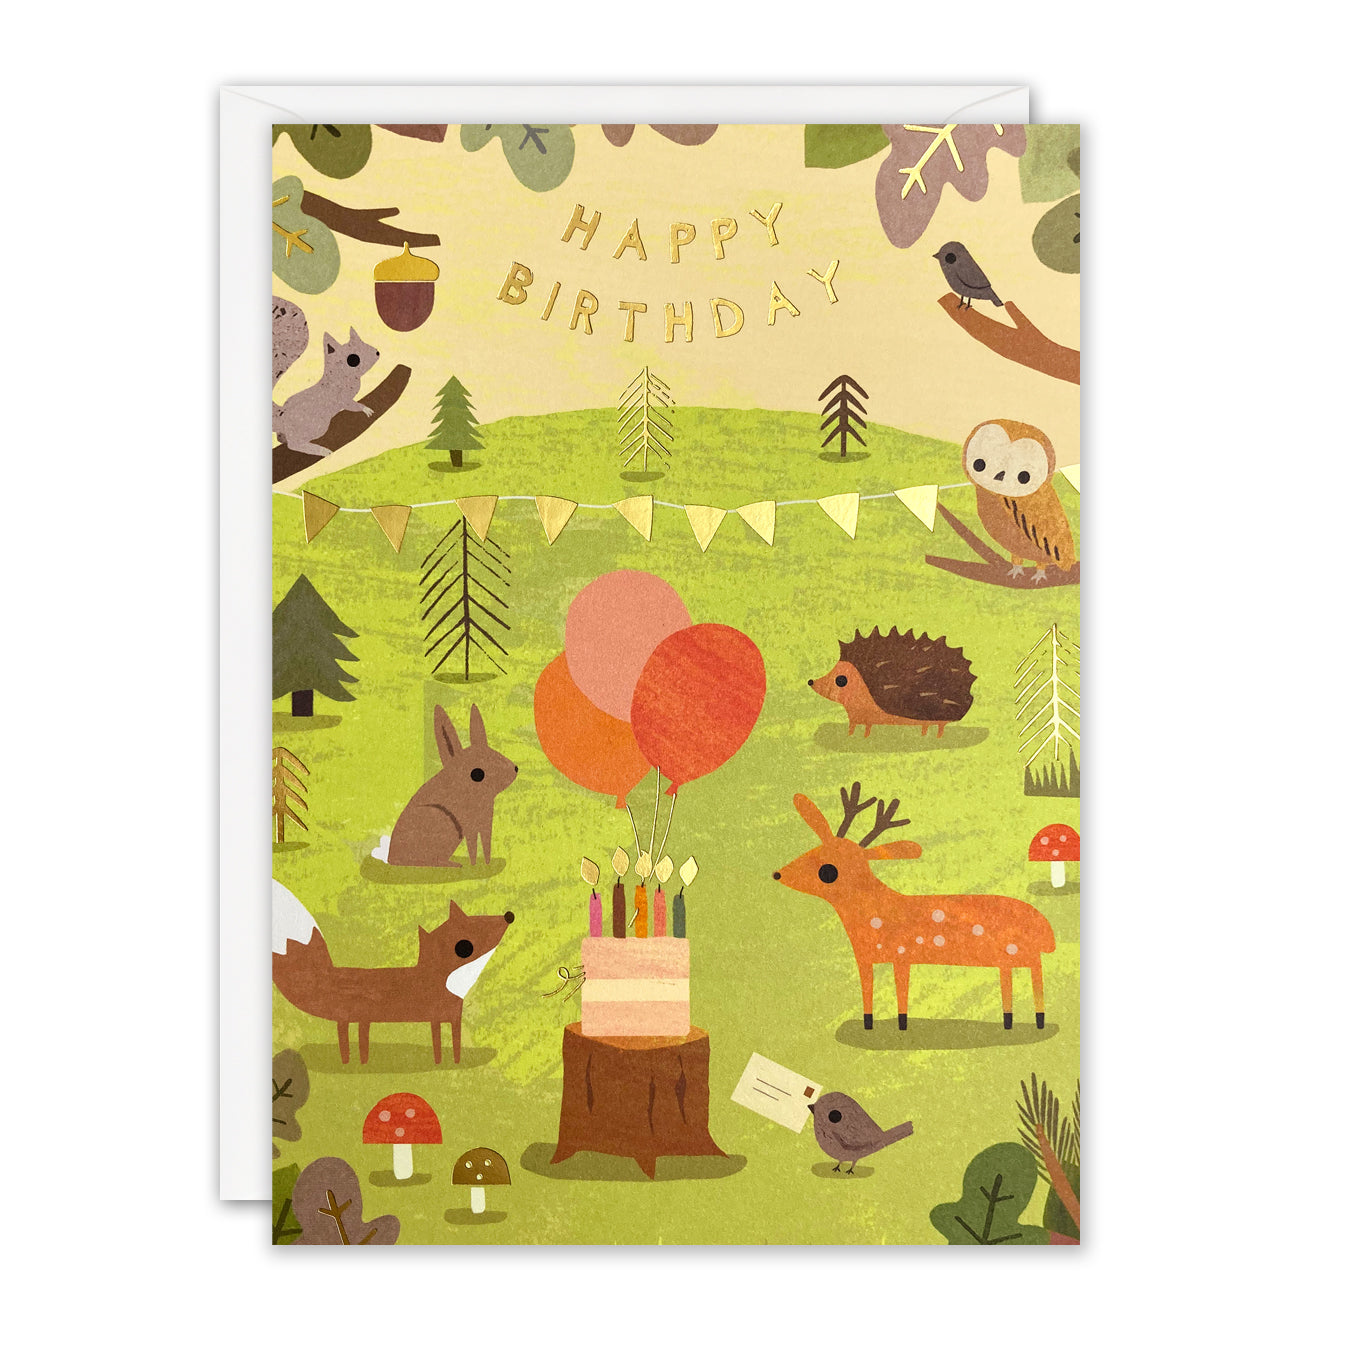 Woodland Party Children's Birthday Card from Penny Black